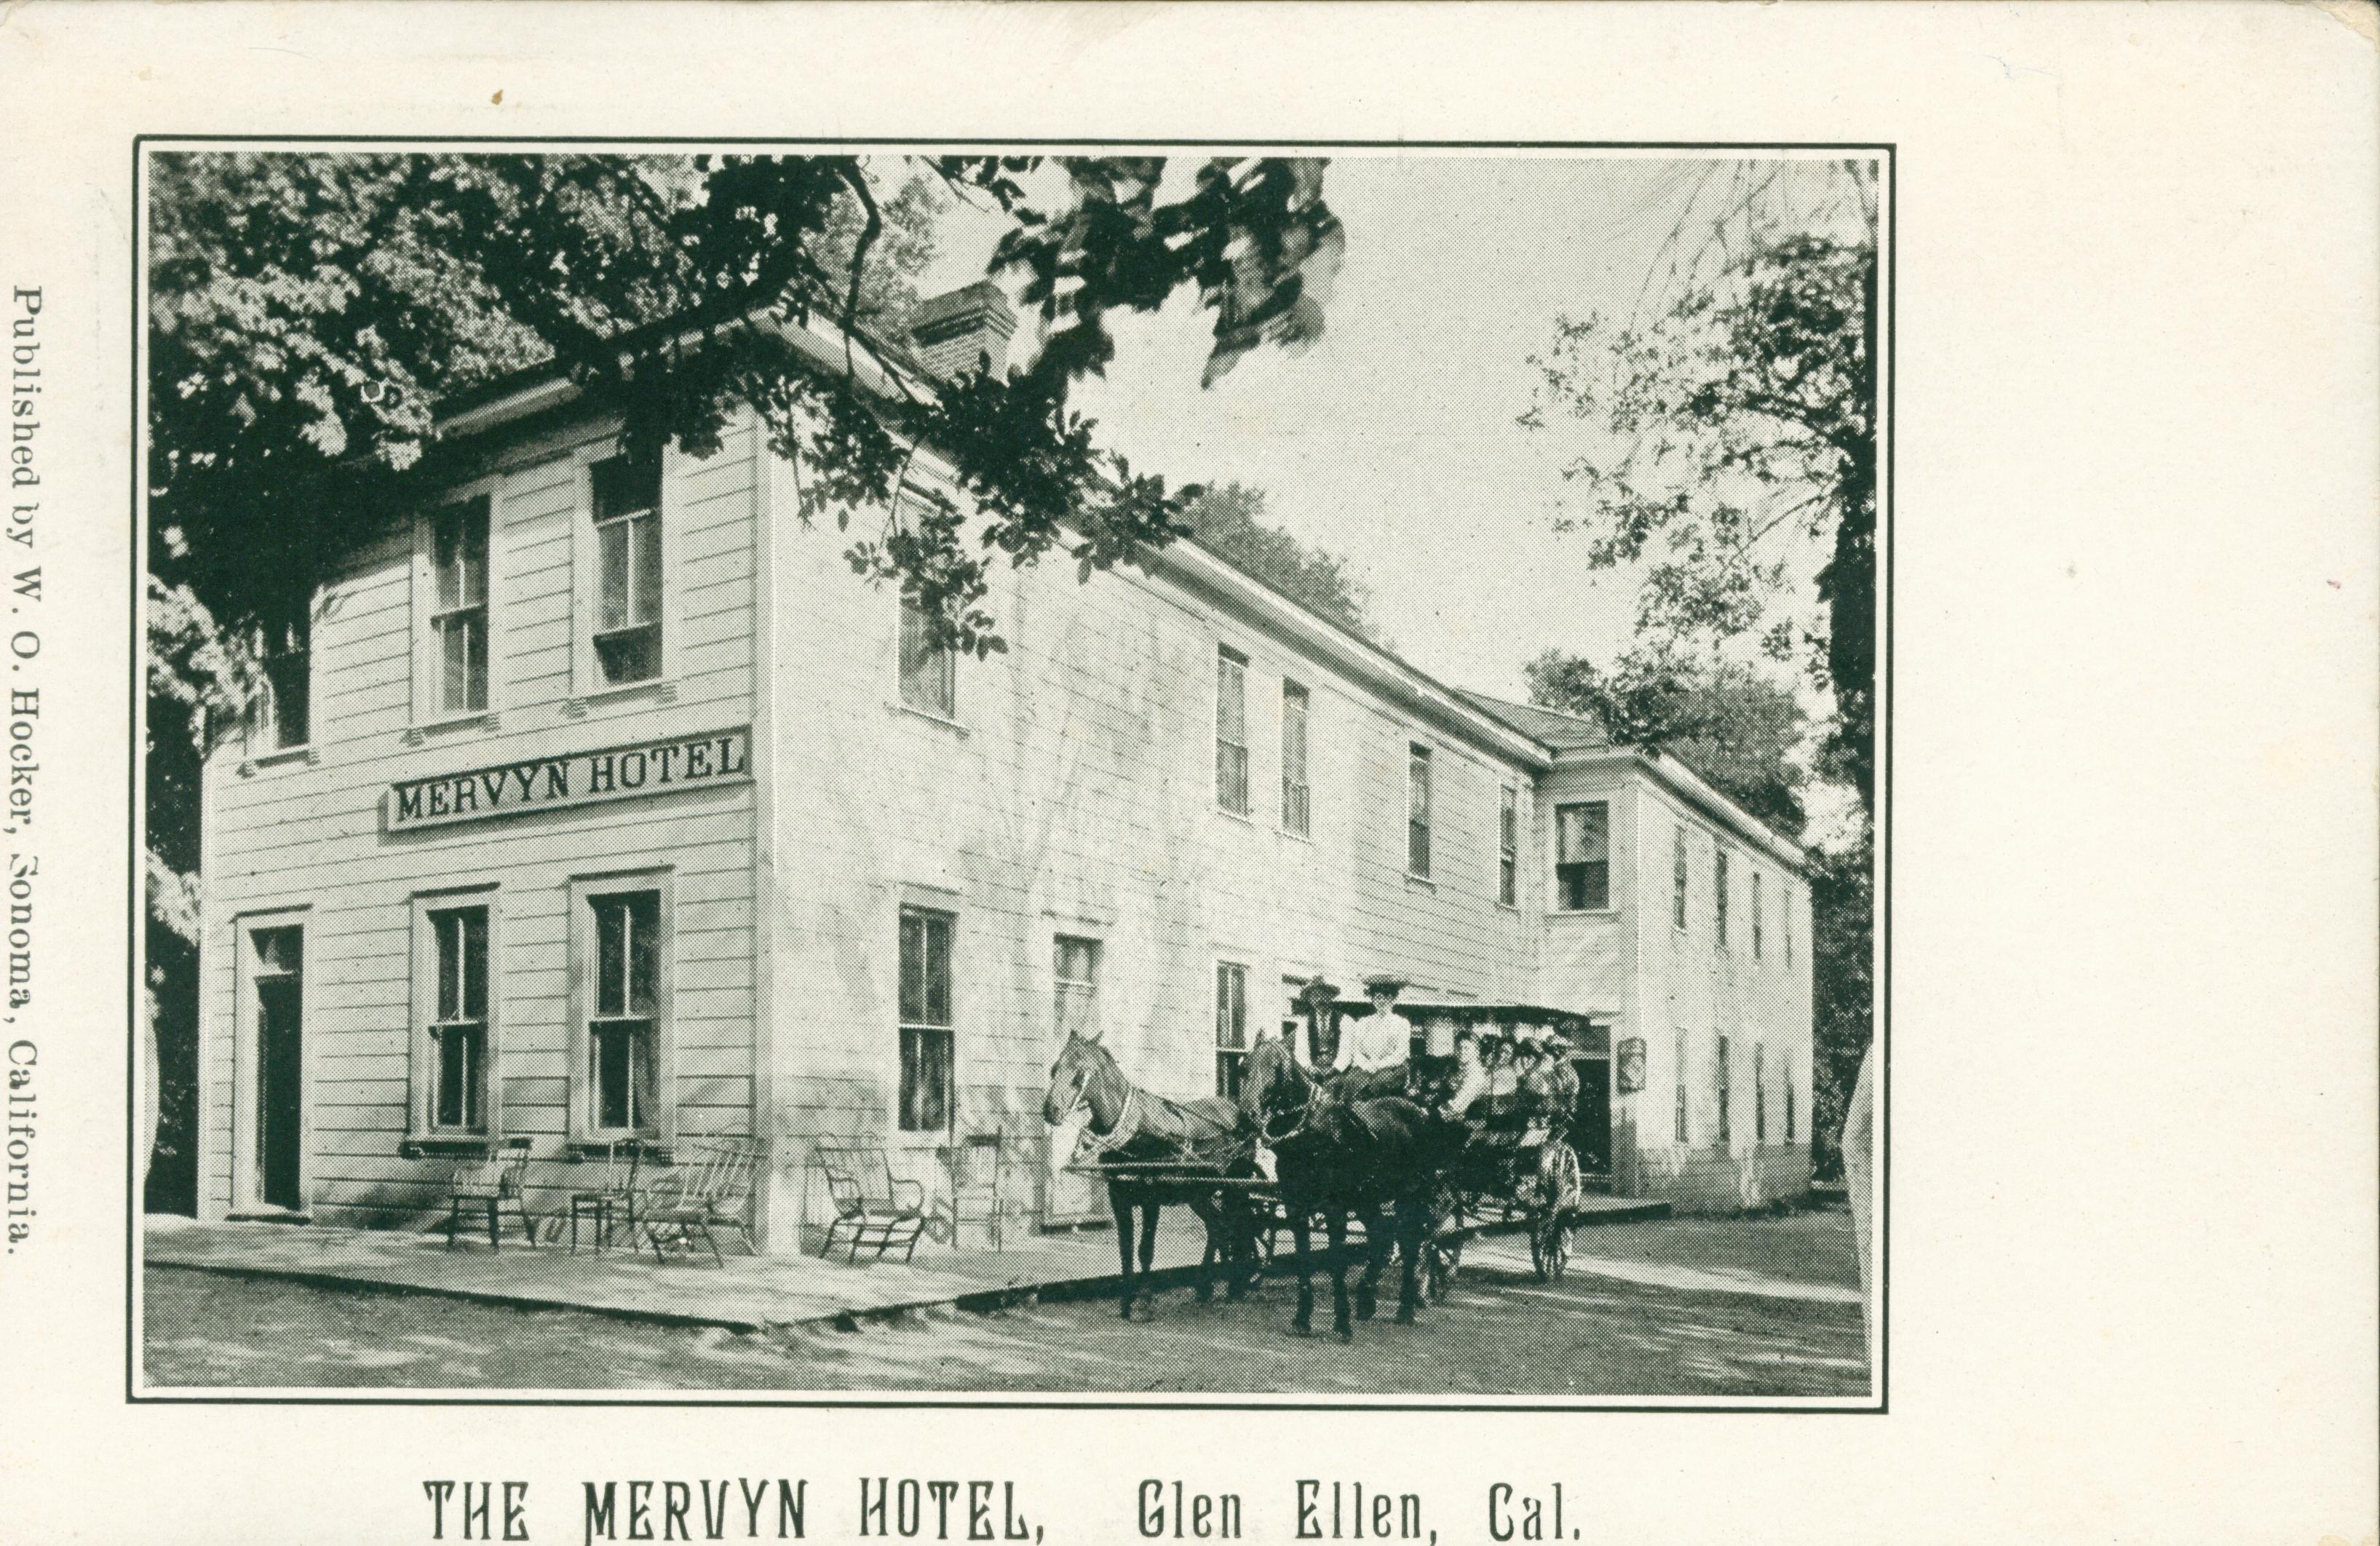 Shows a corner view of the Mervyn Hotel